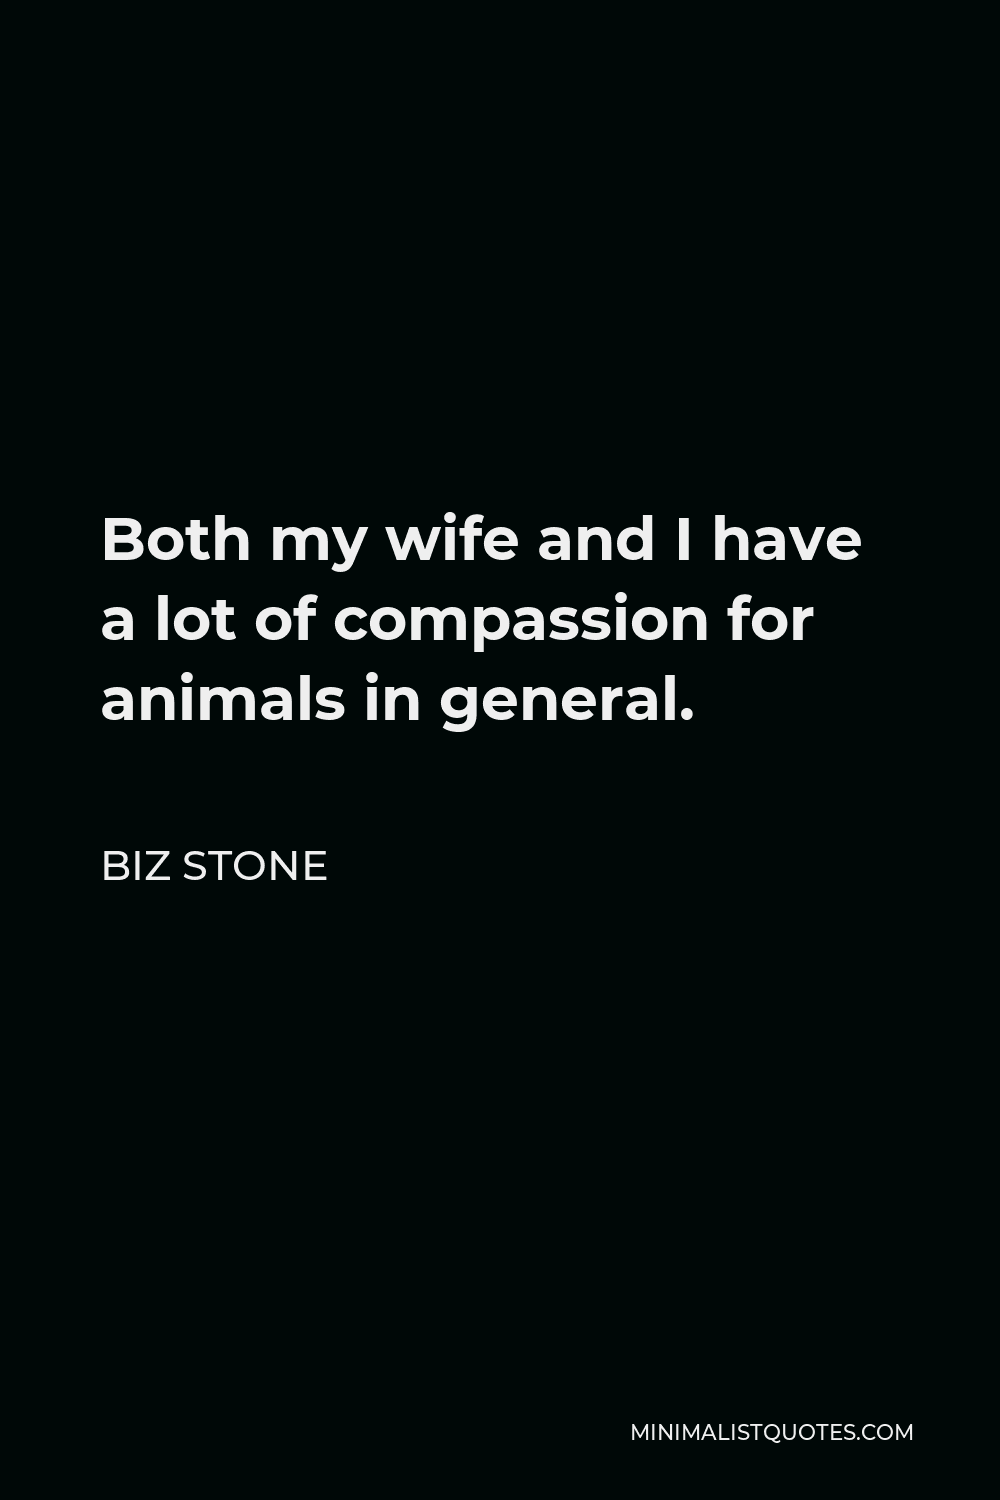 Biz Stone Quote - Both my wife and I have a lot of compassion for animals in general.